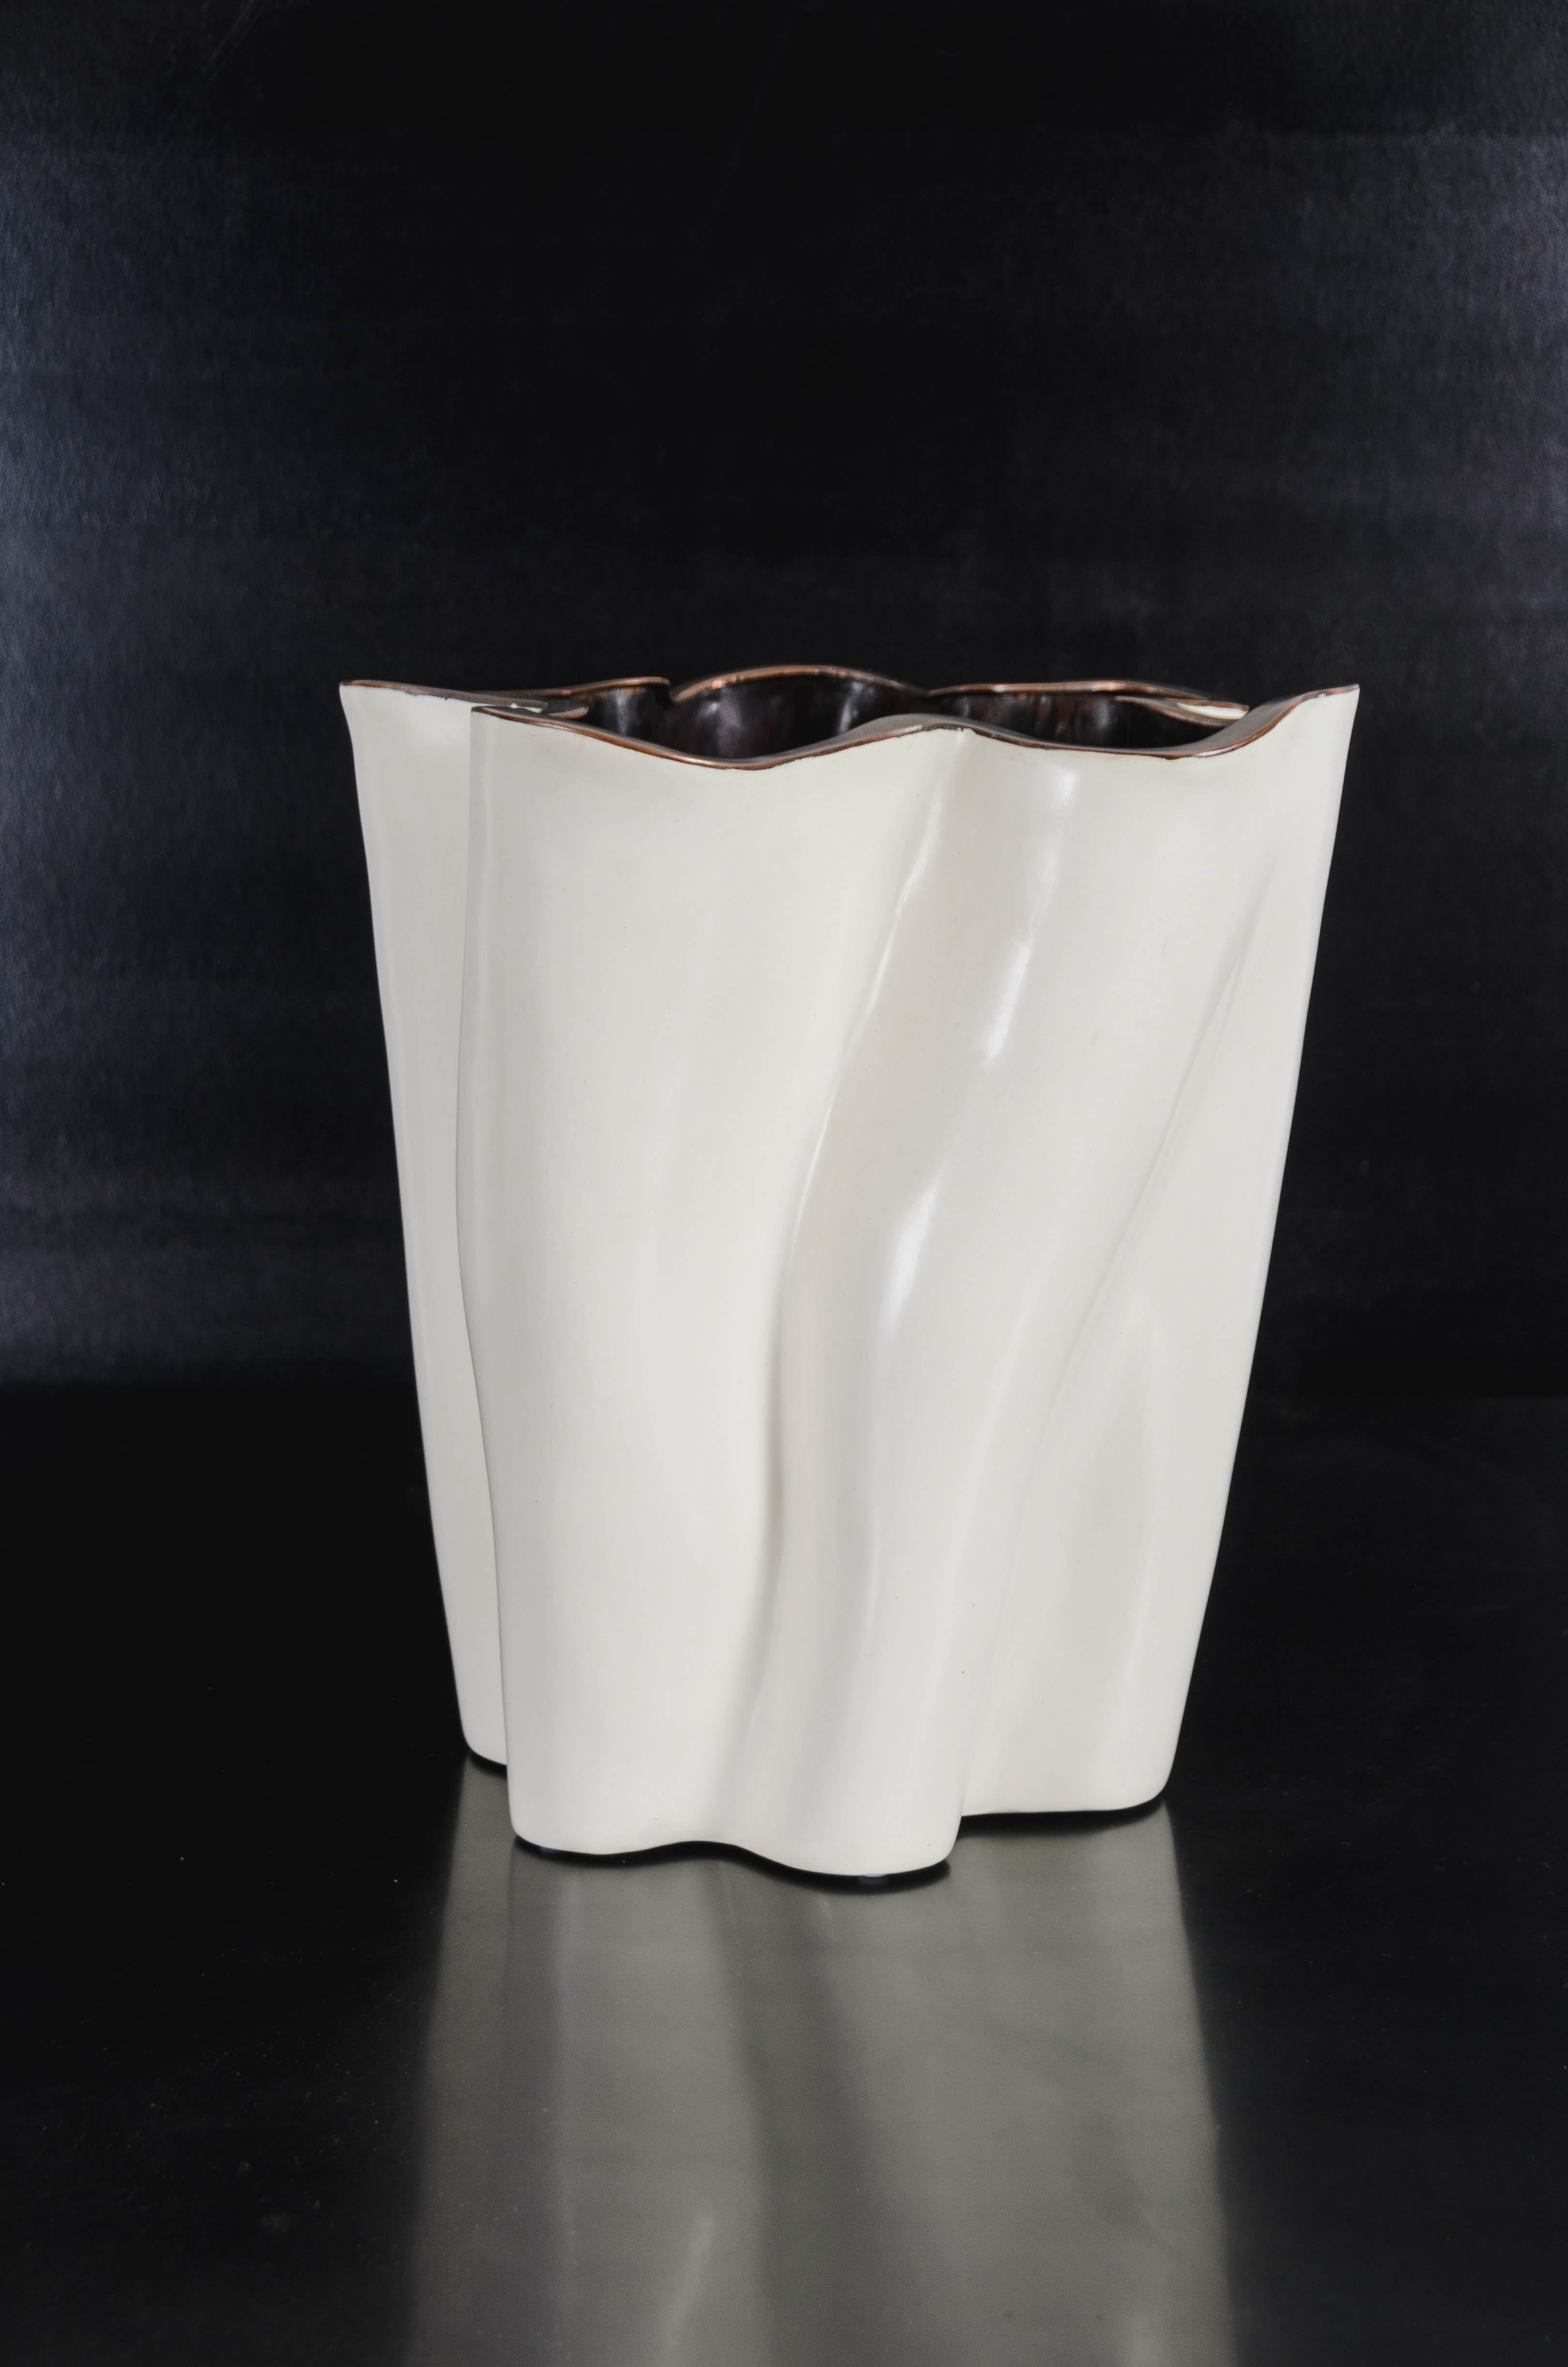 Copper Contemporary Hand Repoussé Ji Guan Hua Vase in Cream Lacquer by Robert Kuo For Sale